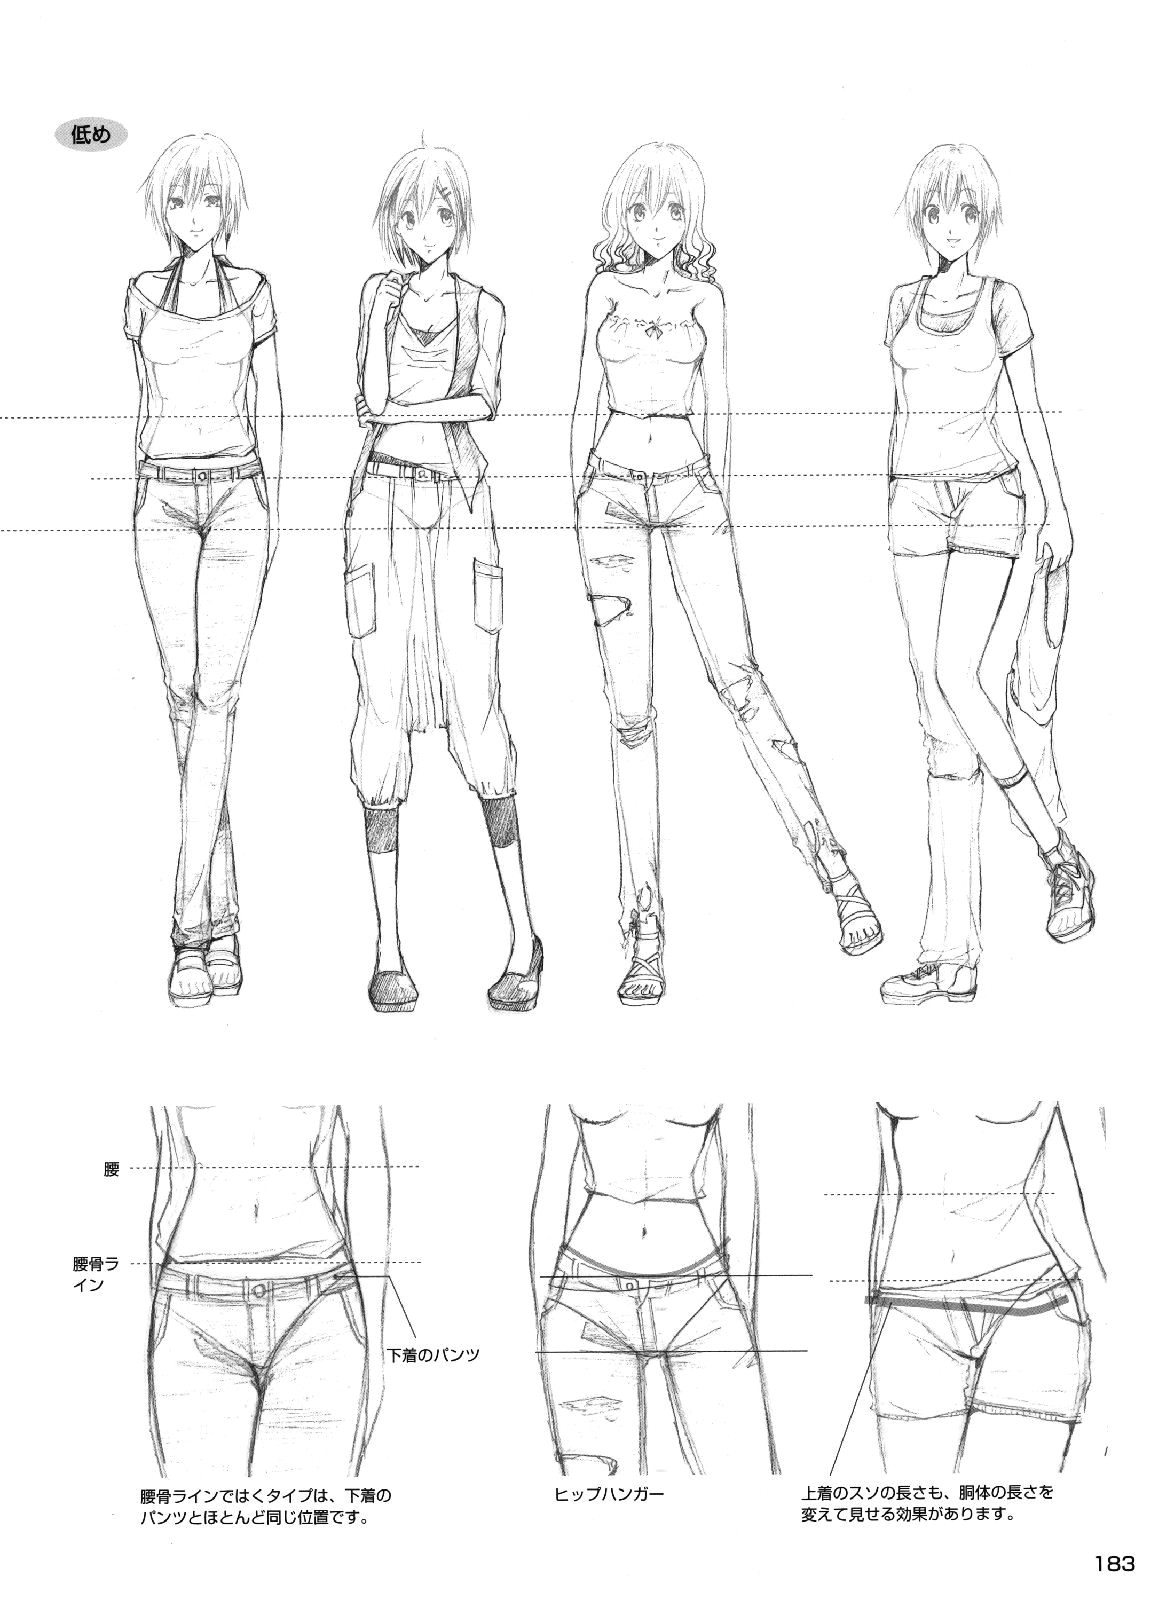 drawings of comic book girl characters clothes